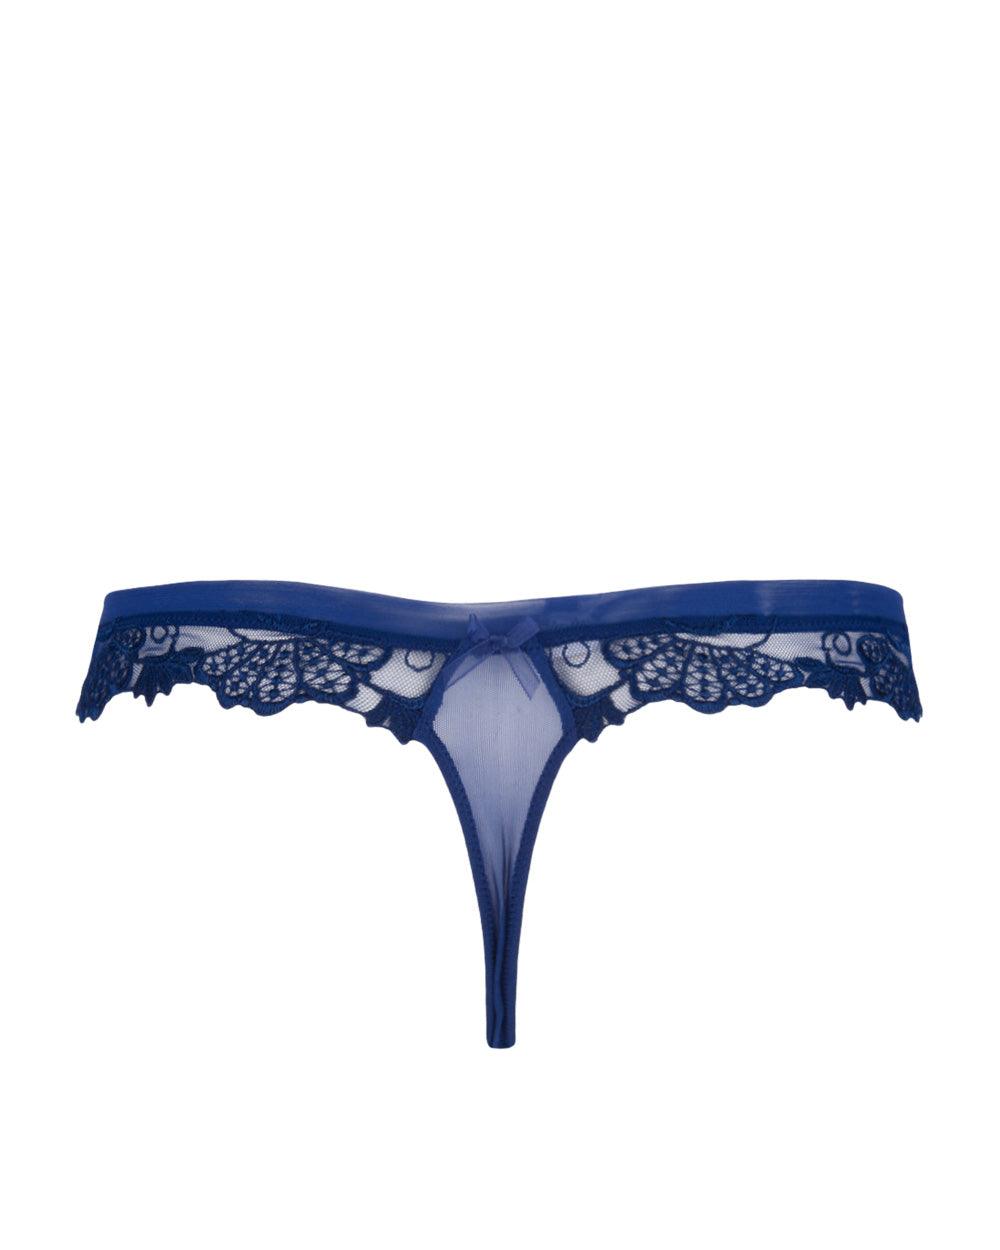 Lise Charmel Dressing Floral Thong - An Intimate Affaire